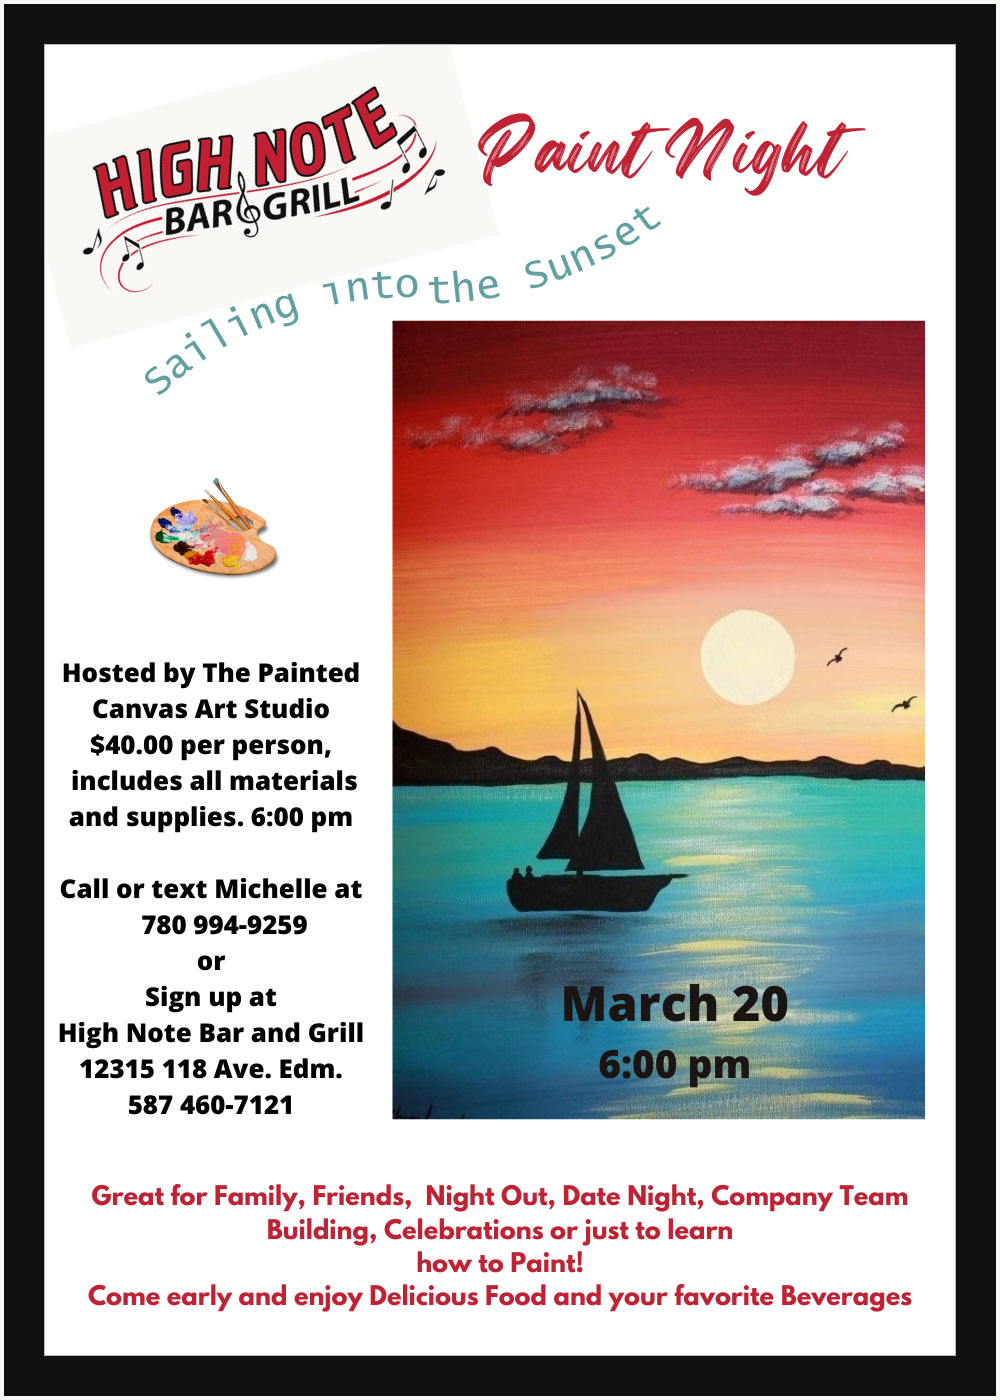 Paint Night (Sailing into the Sunset)